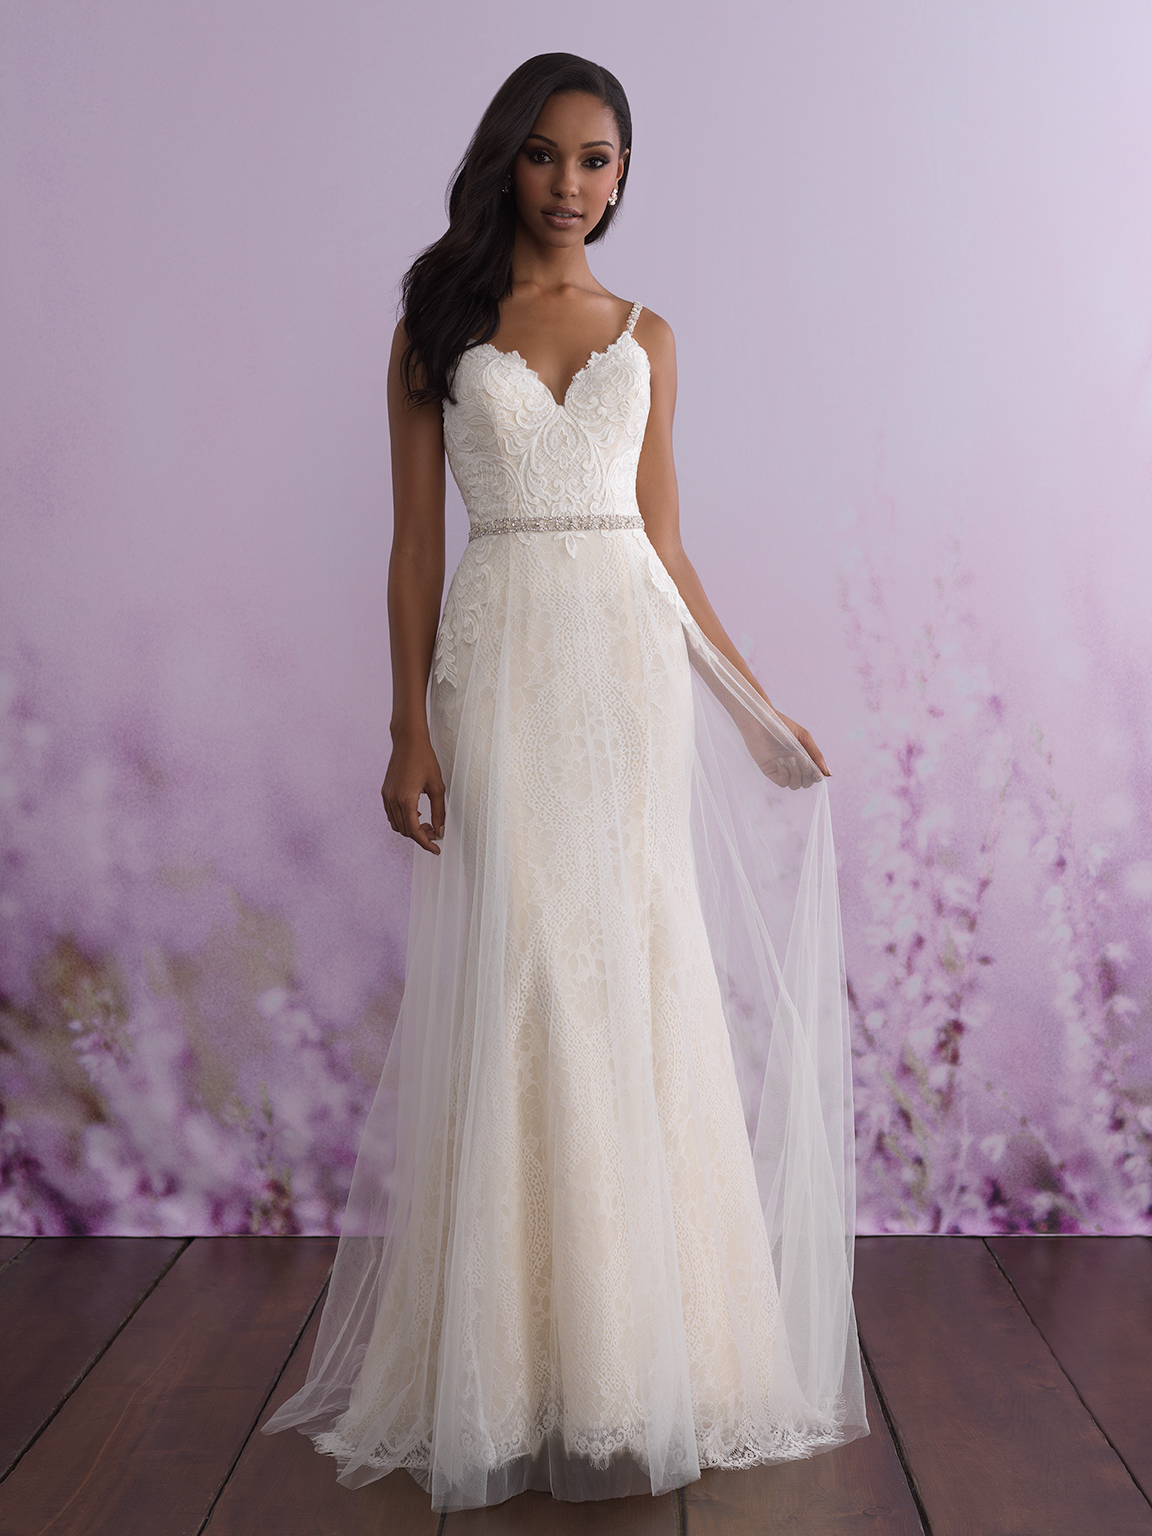 The Most Fitting Wedding Dress Style For Your Body Shape Sacramento Wedding Dresses Miosa Bride